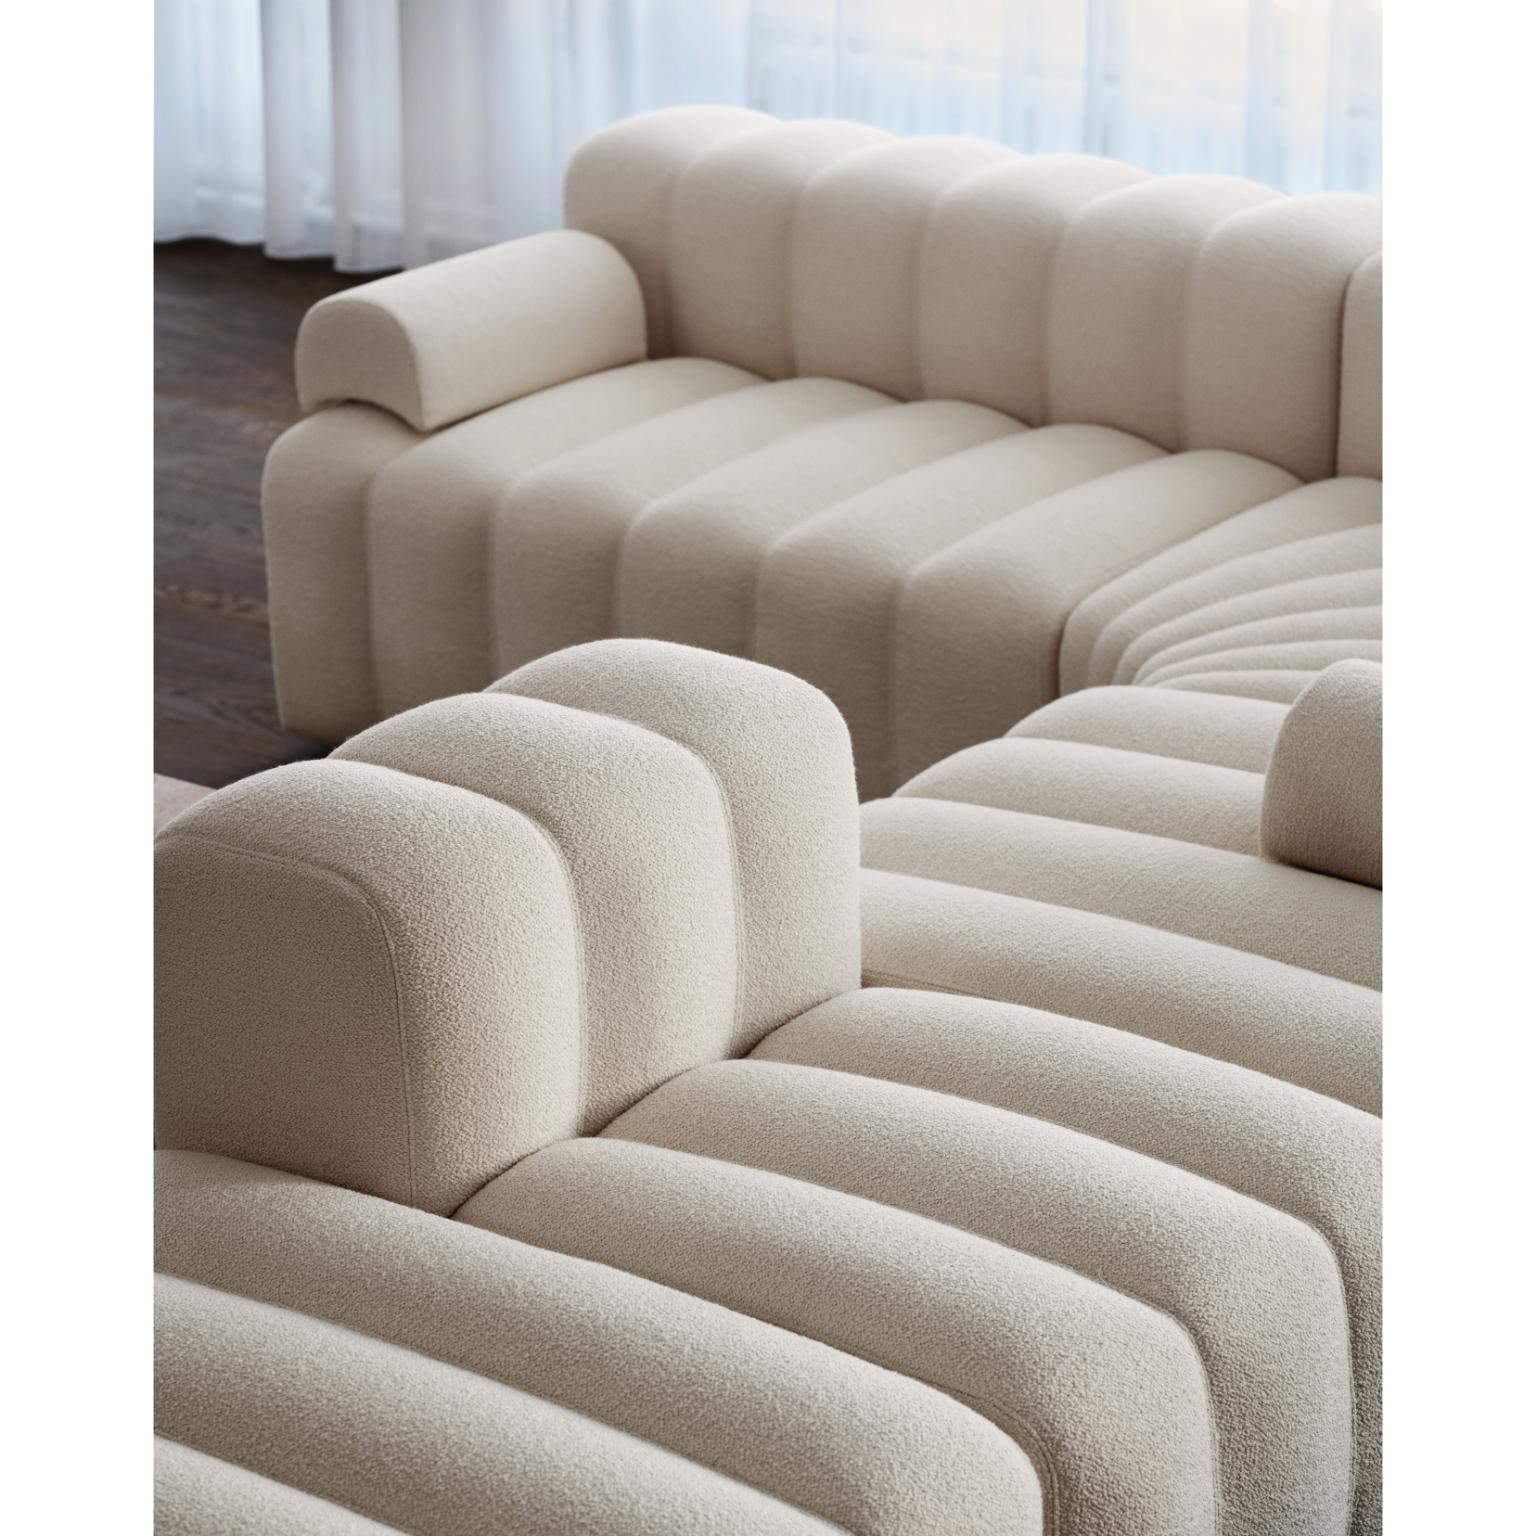 Studio Large Right Modular Sofa With Armrest by NORR11
Dimensions: D 96 x W 153 x H 70 cm. SH 47 cm. 
Materials: Foam, wood and upholstery.
Upholstery: Barnum Boucle Color 3.

Available in different upholstery options. A plywood structure with